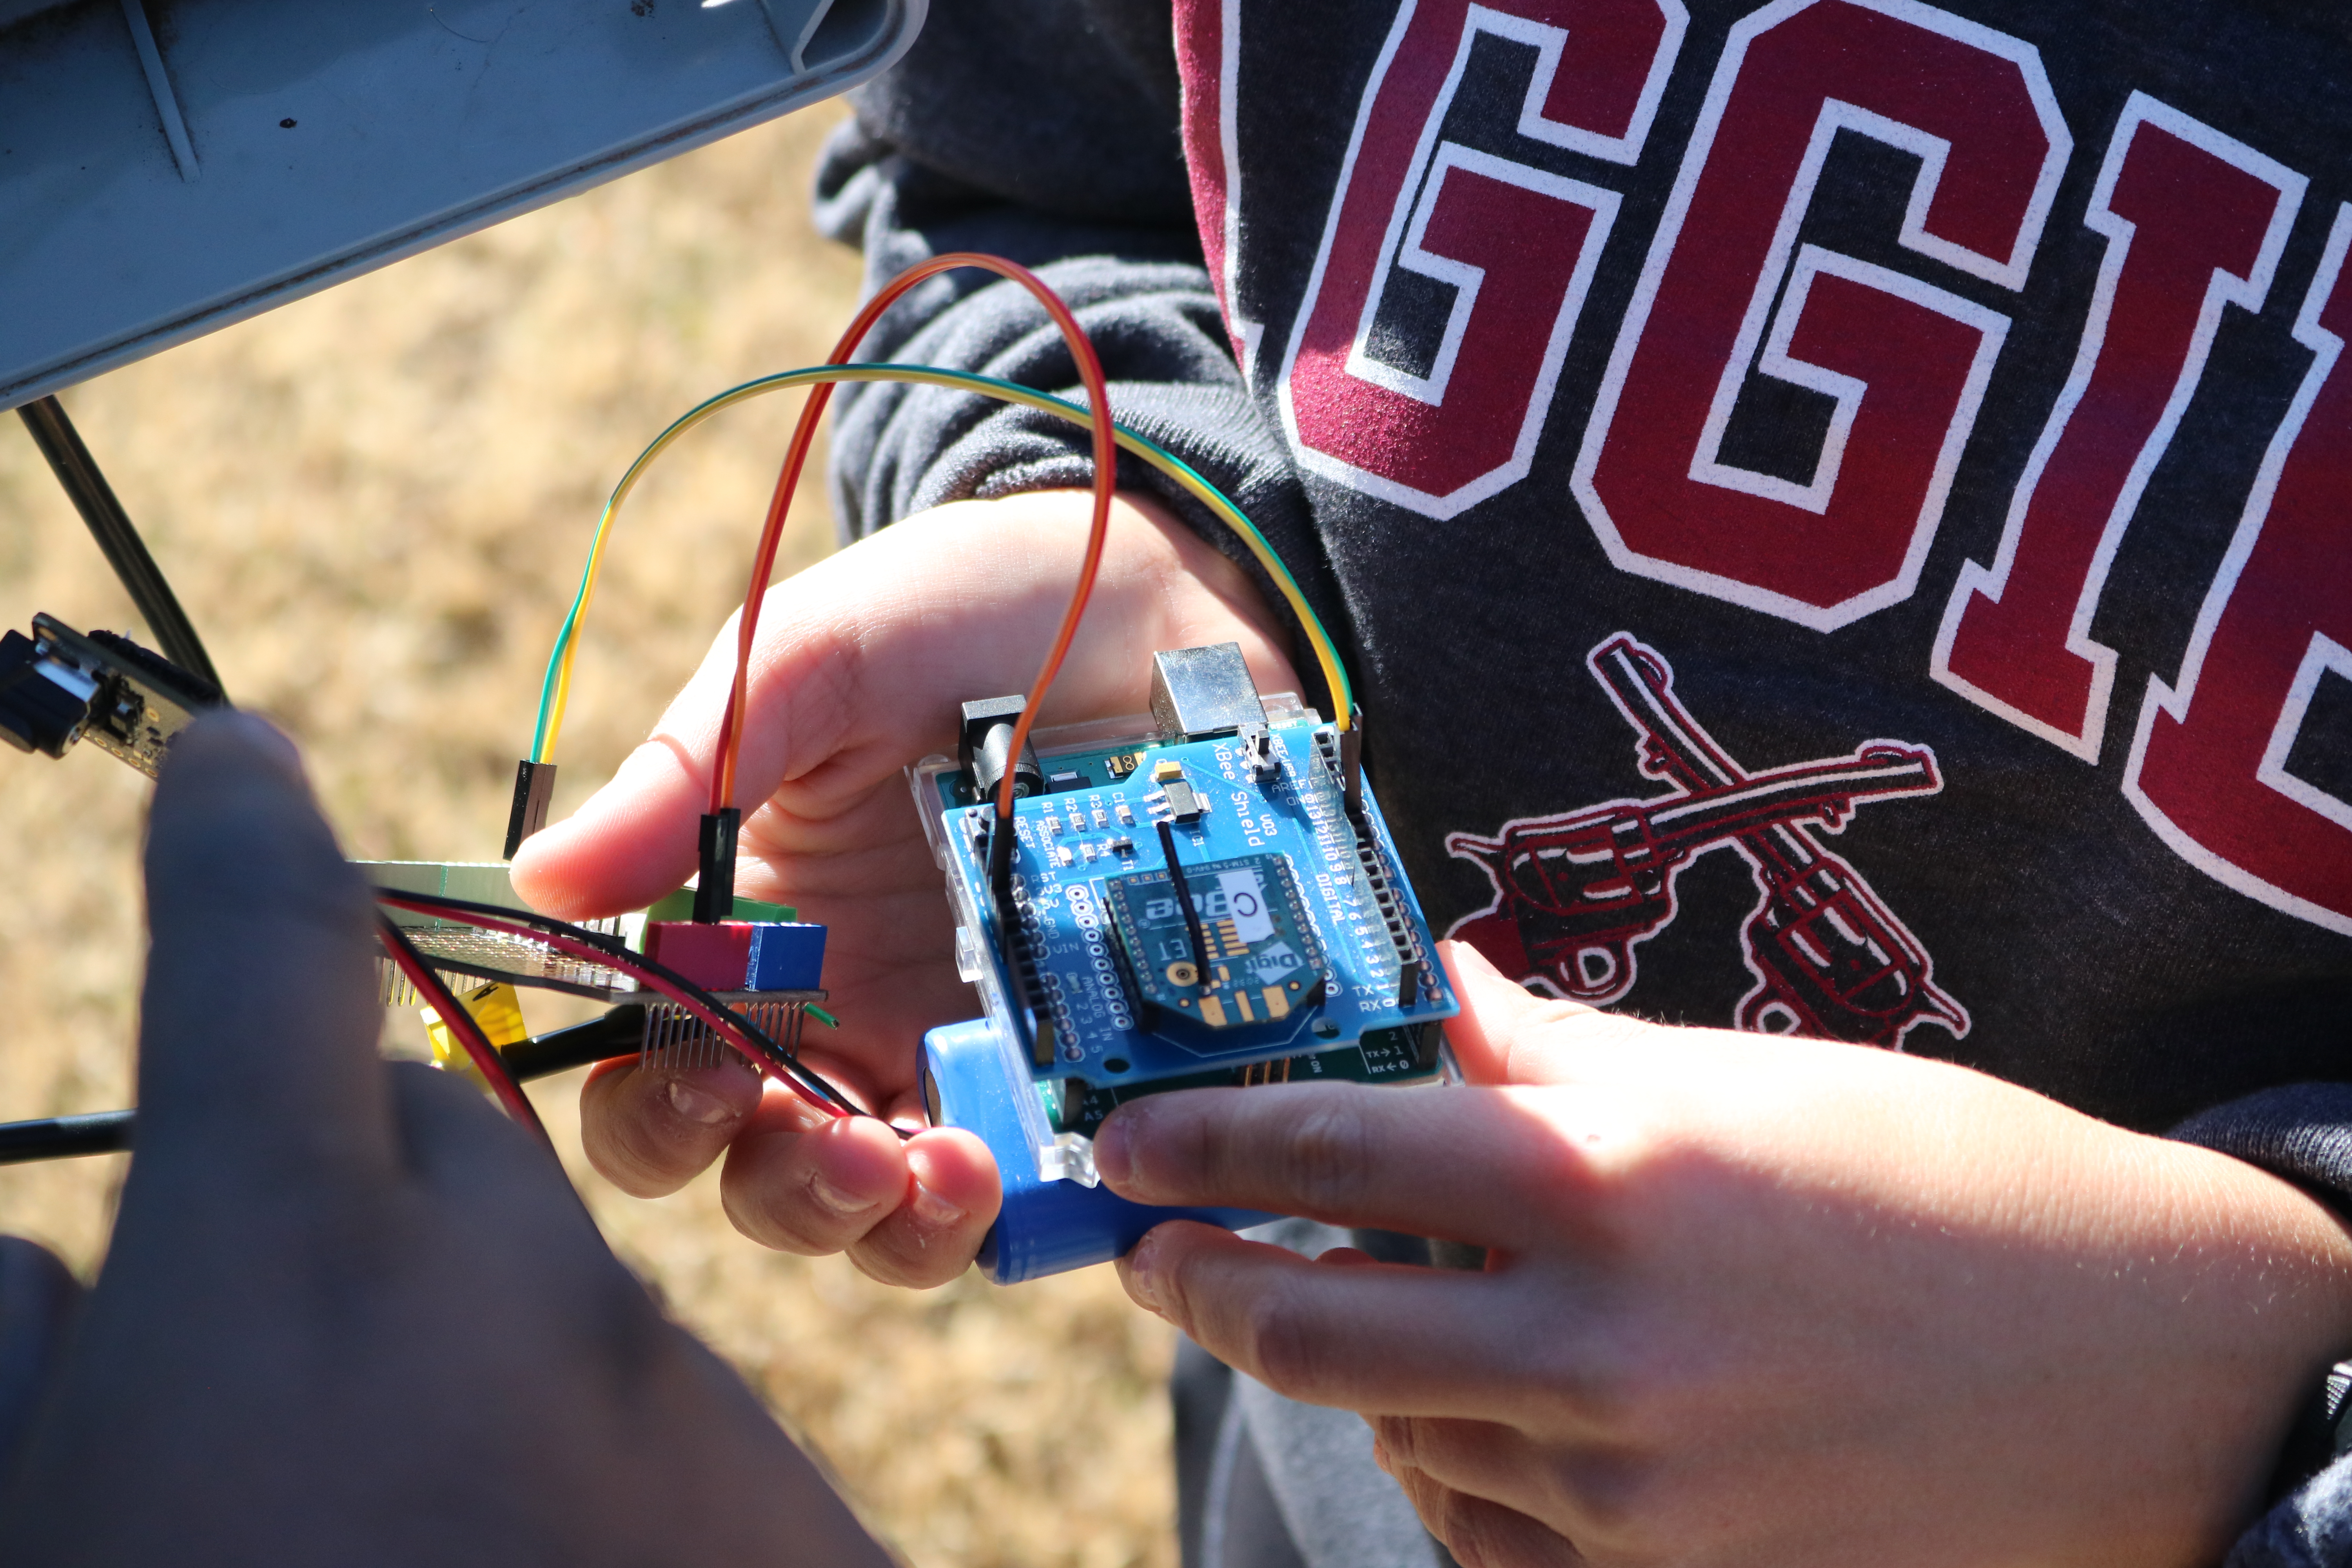 Student holds Microcontroller